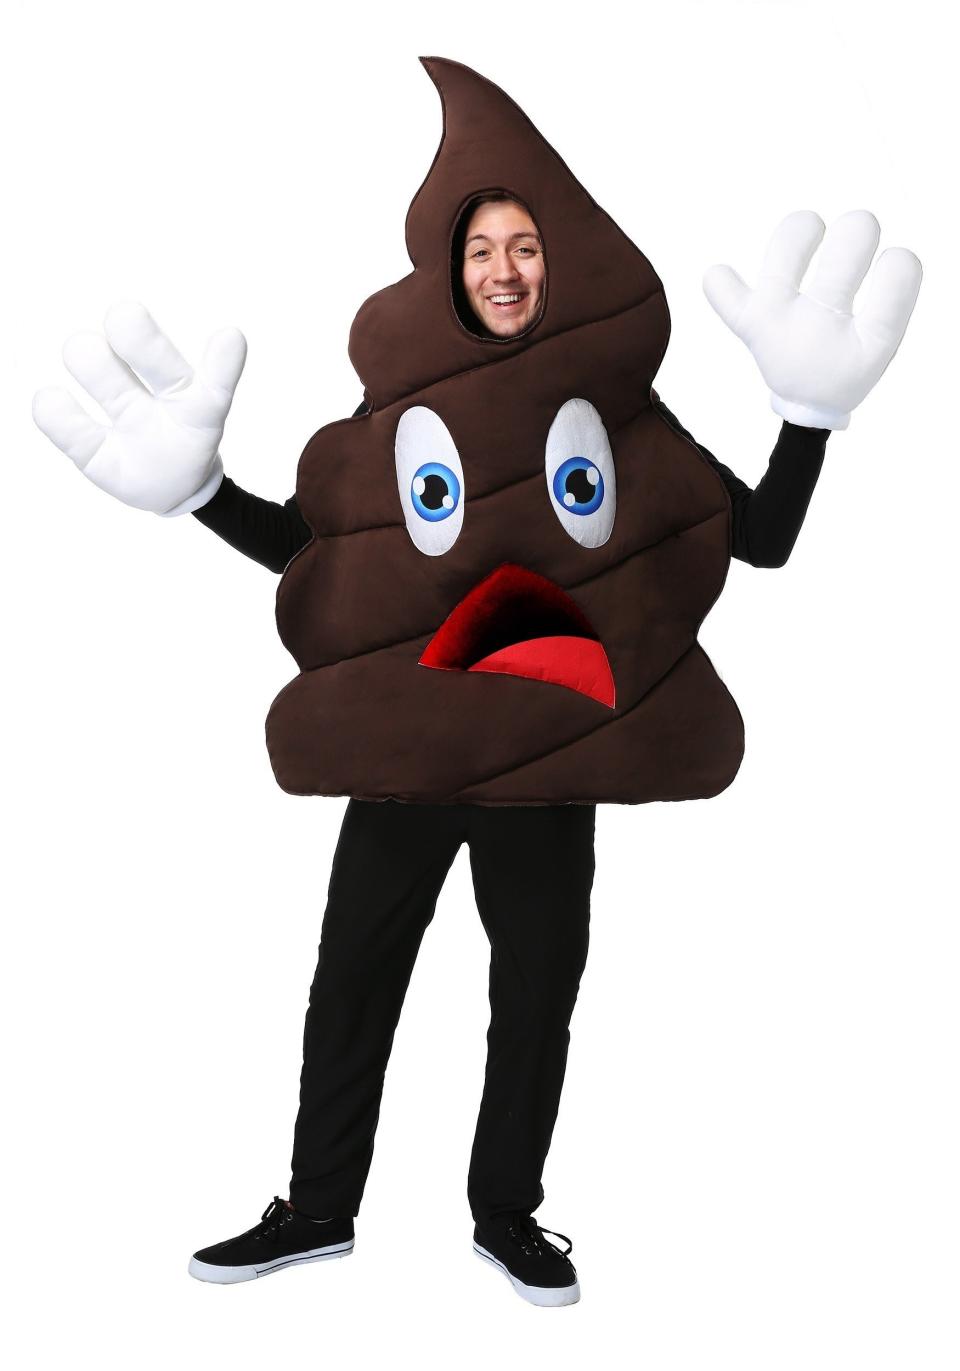 Sure <a href="https://www.halloweencostumes.com/happy-poop-costume.html" target="_blank">this costume is the epitome of crap,</a> but there isn't a person at the Halloween party who won't want to take a selfie with&nbsp;the person who wears it. Of course, some may not want to stand too close.